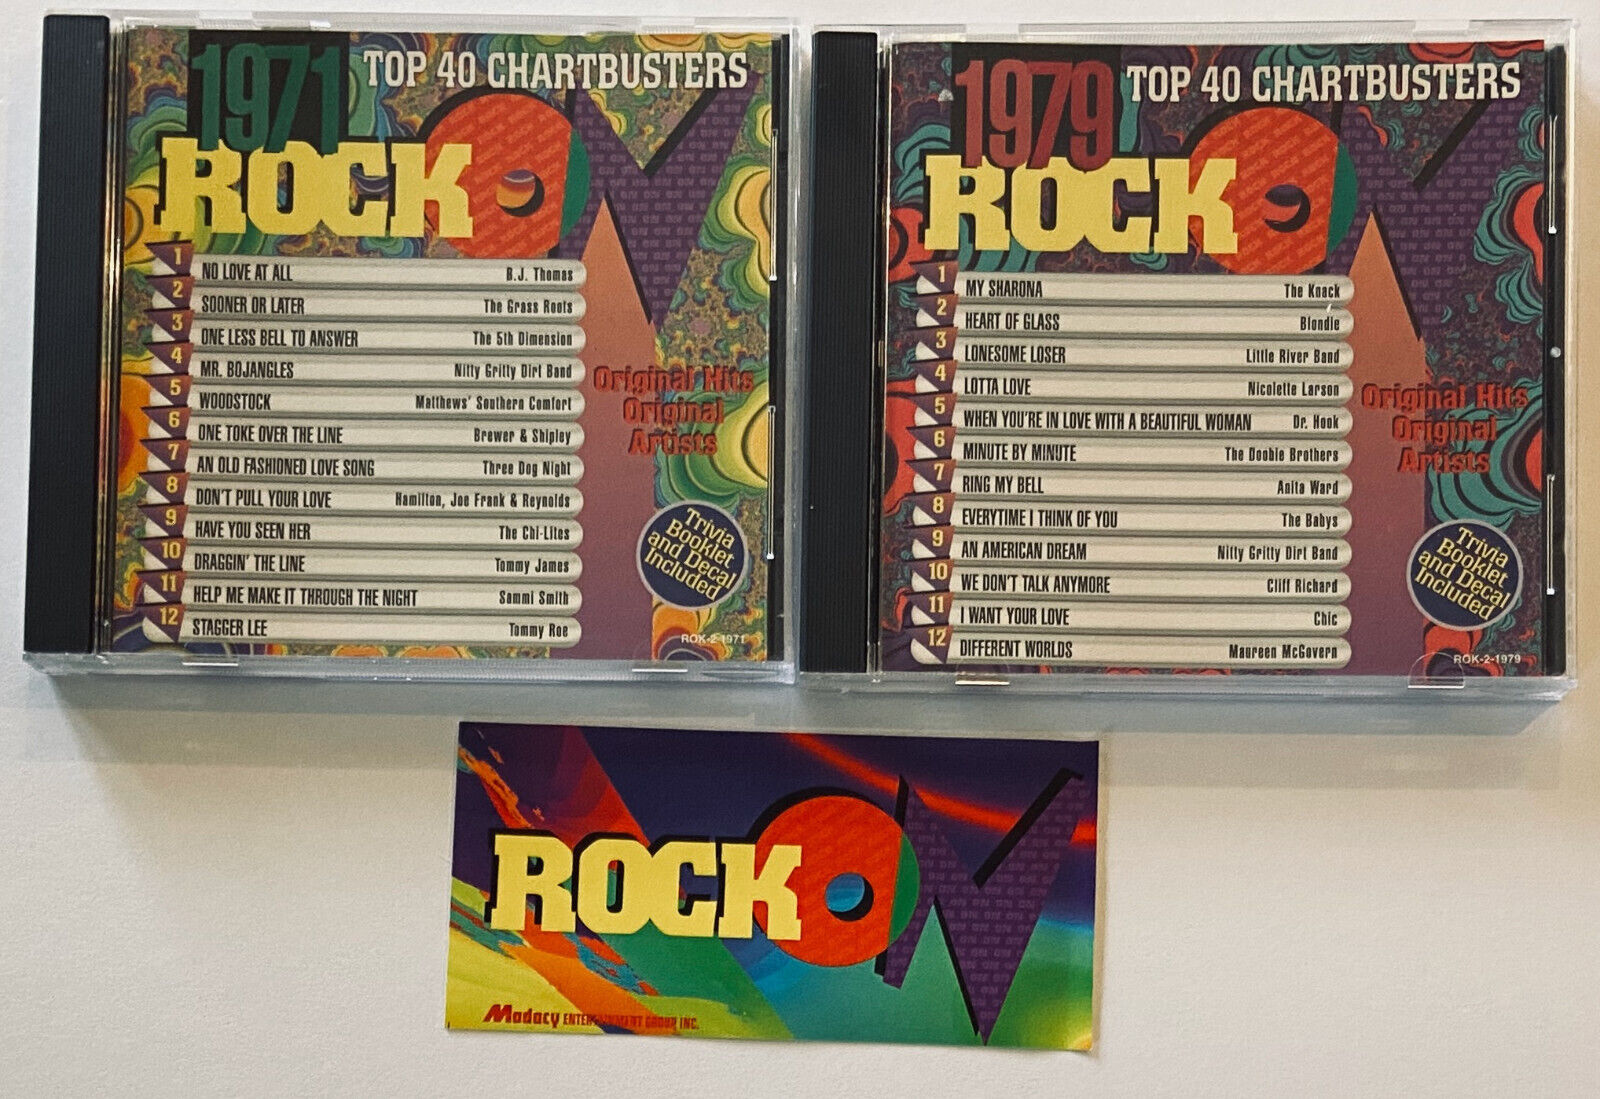 Rock On 1971 and 1979 CD Lot Knack Blondie Chic Babys Grass Roots Various